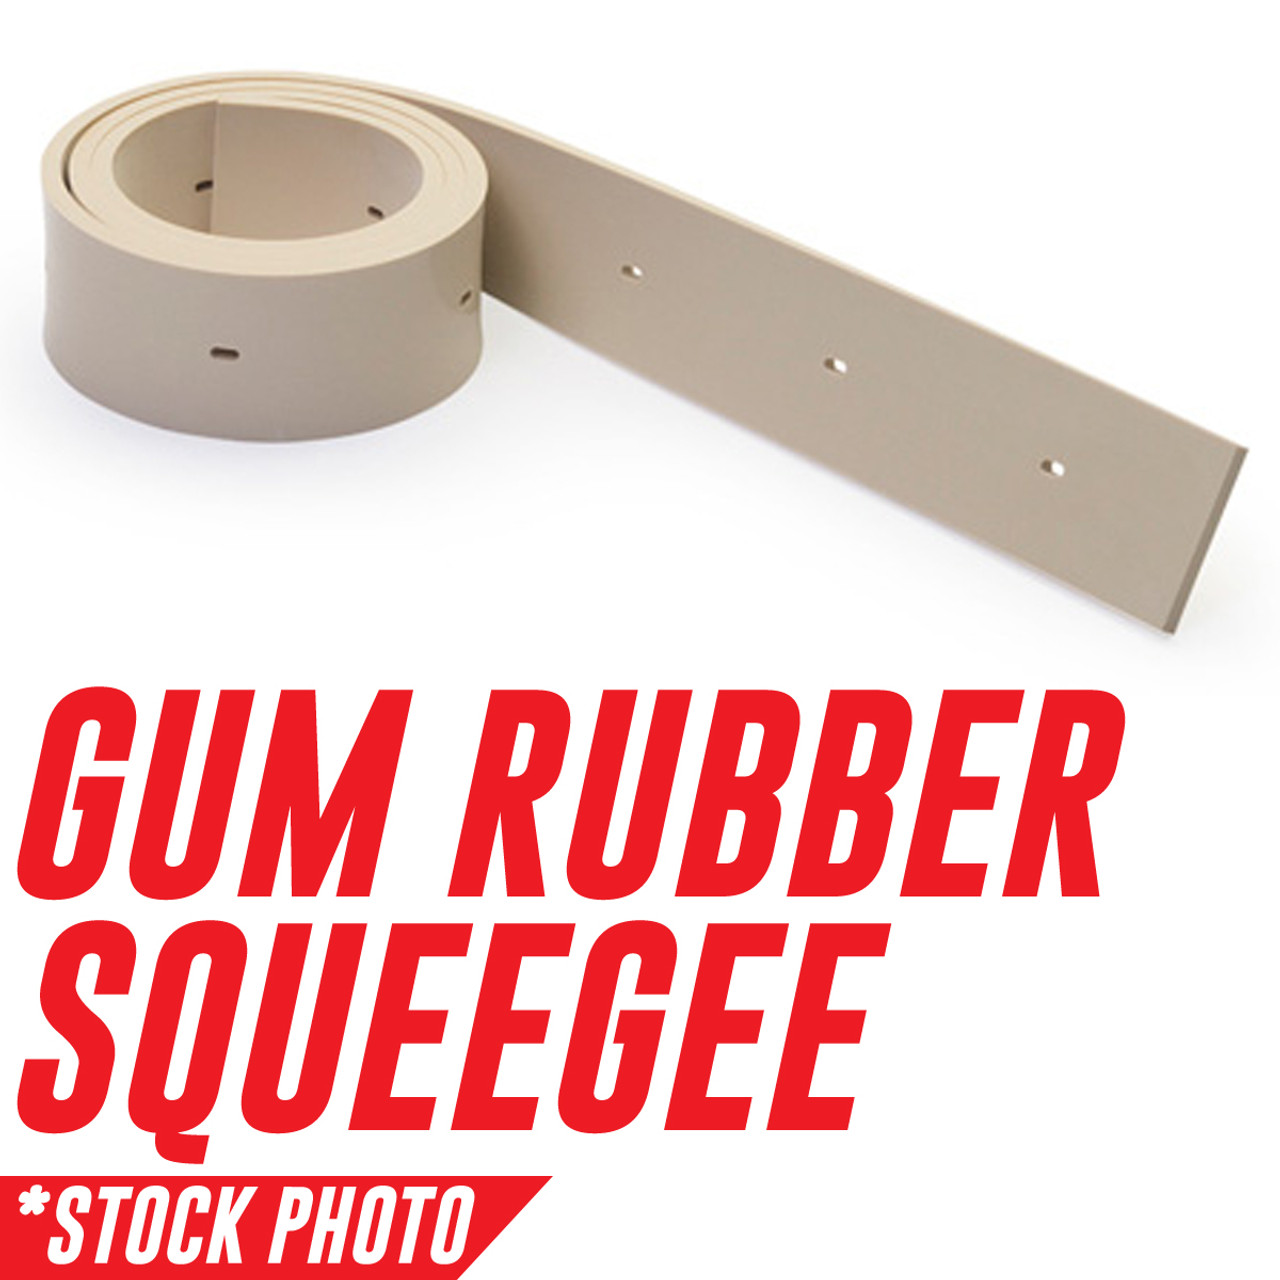 25-755G: Squeegee, Front 35", Tan Gum fits Various Factory Cat Models